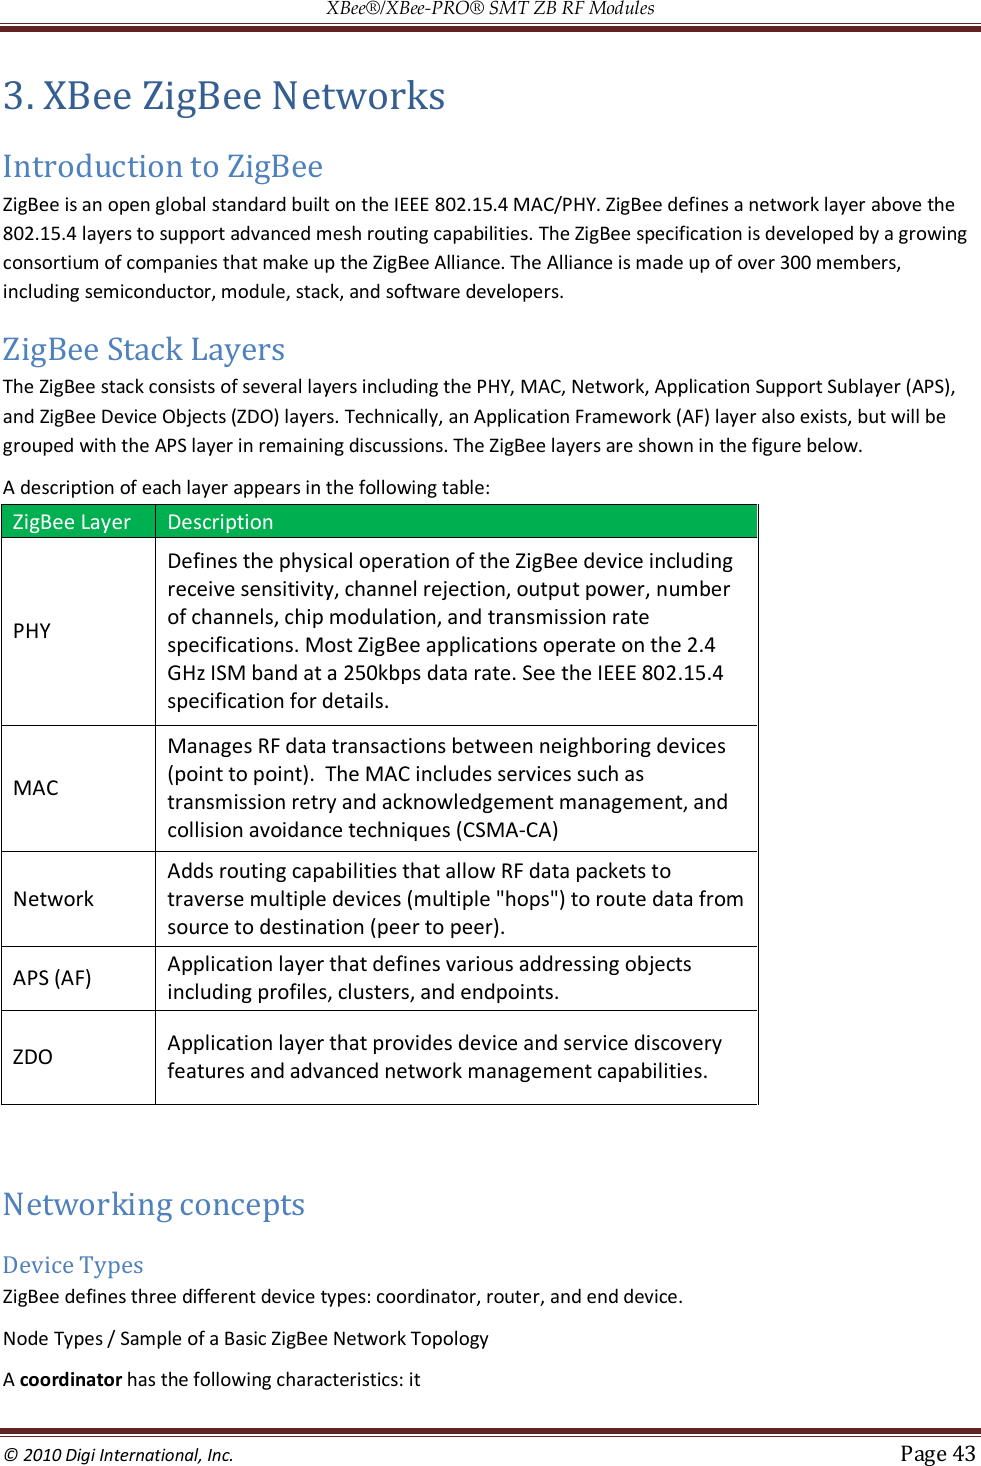 XBee®/XBee‐PRO® SMT ZB RF Modules  © 2010 Digi International, Inc.   Page 43  3. XBee ZigBee Networks Introduction to ZigBee ZigBee is an open global standard built on the IEEE 802.15.4 MAC/PHY. ZigBee defines a network layer above the 802.15.4 layers to support advanced mesh routing capabilities. The ZigBee specification is developed by a growing consortium of companies that make up the ZigBee Alliance. The Alliance is made up of over 300 members, including semiconductor, module, stack, and software developers. ZigBee Stack Layers The ZigBee stack consists of several layers including the PHY, MAC, Network, Application Support Sublayer (APS), and ZigBee Device Objects (ZDO) layers. Technically, an Application Framework (AF) layer also exists, but will be grouped with the APS layer in remaining discussions. The ZigBee layers are shown in the figure below.  A description of each layer appears in the following table: ZigBee Layer  Description PHY Defines the physical operation of the ZigBee device including receive sensitivity, channel rejection, output power, number of channels, chip modulation, and transmission rate specifications. Most ZigBee applications operate on the 2.4 GHz ISM band at a 250kbps data rate. See the IEEE 802.15.4 specification for details. MAC Manages RF data transactions between neighboring devices (point to point).  The MAC includes services such as transmission retry and acknowledgement management, and collision avoidance techniques (CSMA-CA) Network Adds routing capabilities that allow RF data packets to traverse multiple devices (multiple &quot;hops&quot;) to route data from source to destination (peer to peer). APS (AF)  Application layer that defines various addressing objects including profiles, clusters, and endpoints. ZDO  Application layer that provides device and service discovery features and advanced network management capabilities.  Networking concepts Device Types ZigBee defines three different device types: coordinator, router, and end device.  Node Types / Sample of a Basic ZigBee Network Topology  A coordinator has the following characteristics: it  